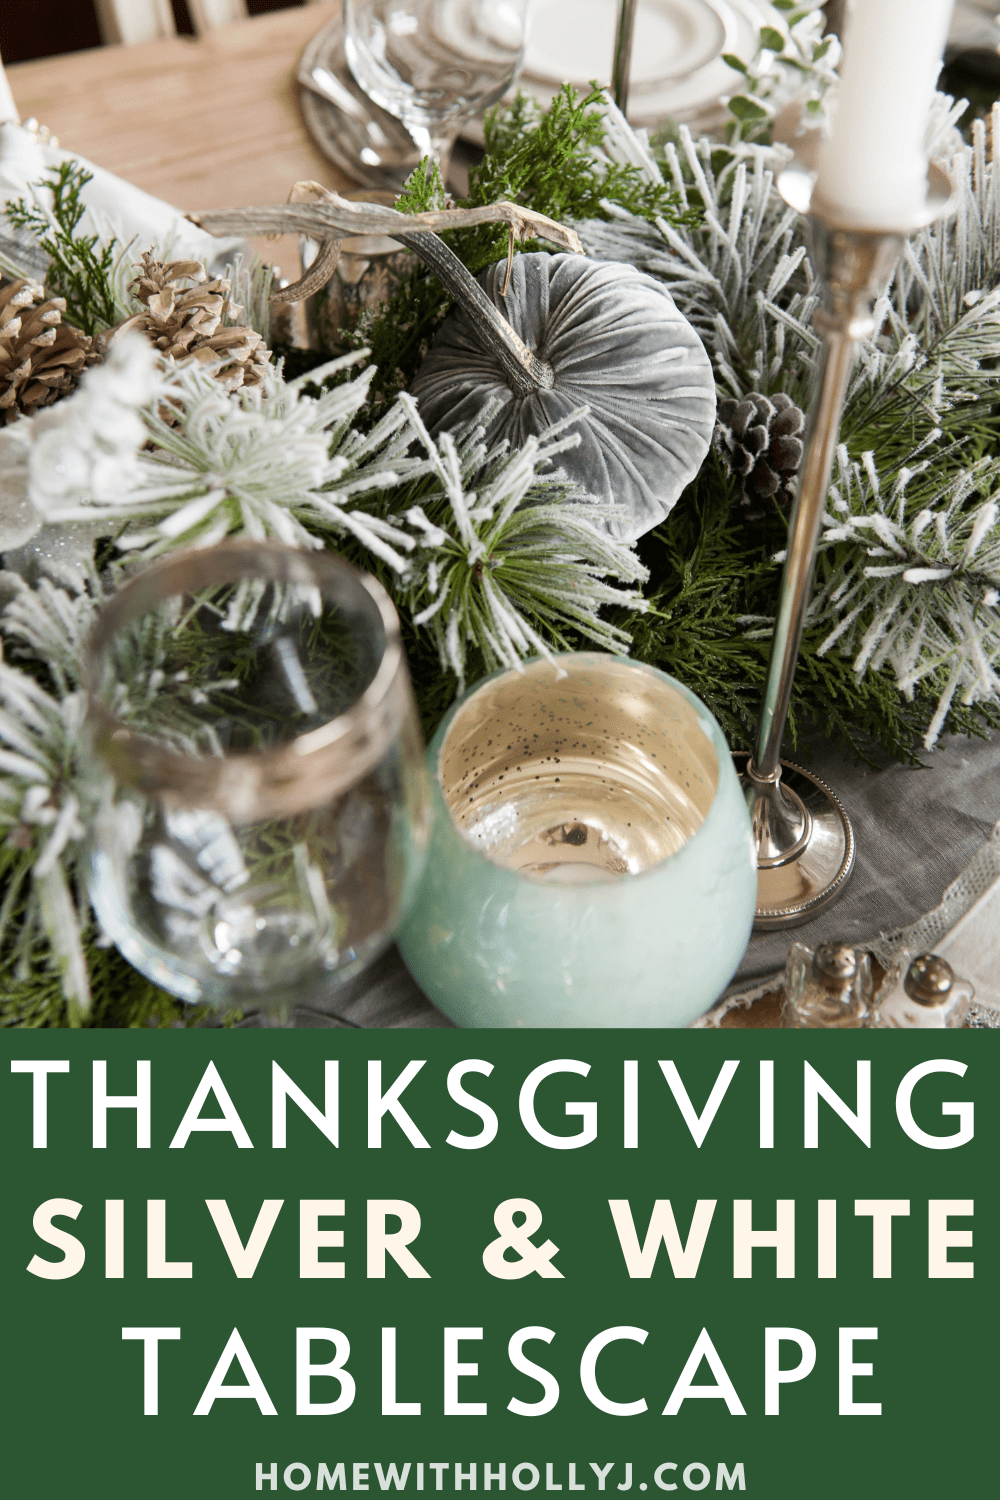 Sharing an Elegant Thanksgiving Tablescape featuring silver and white table settings, a garland table runner, and pumpkins with greenery